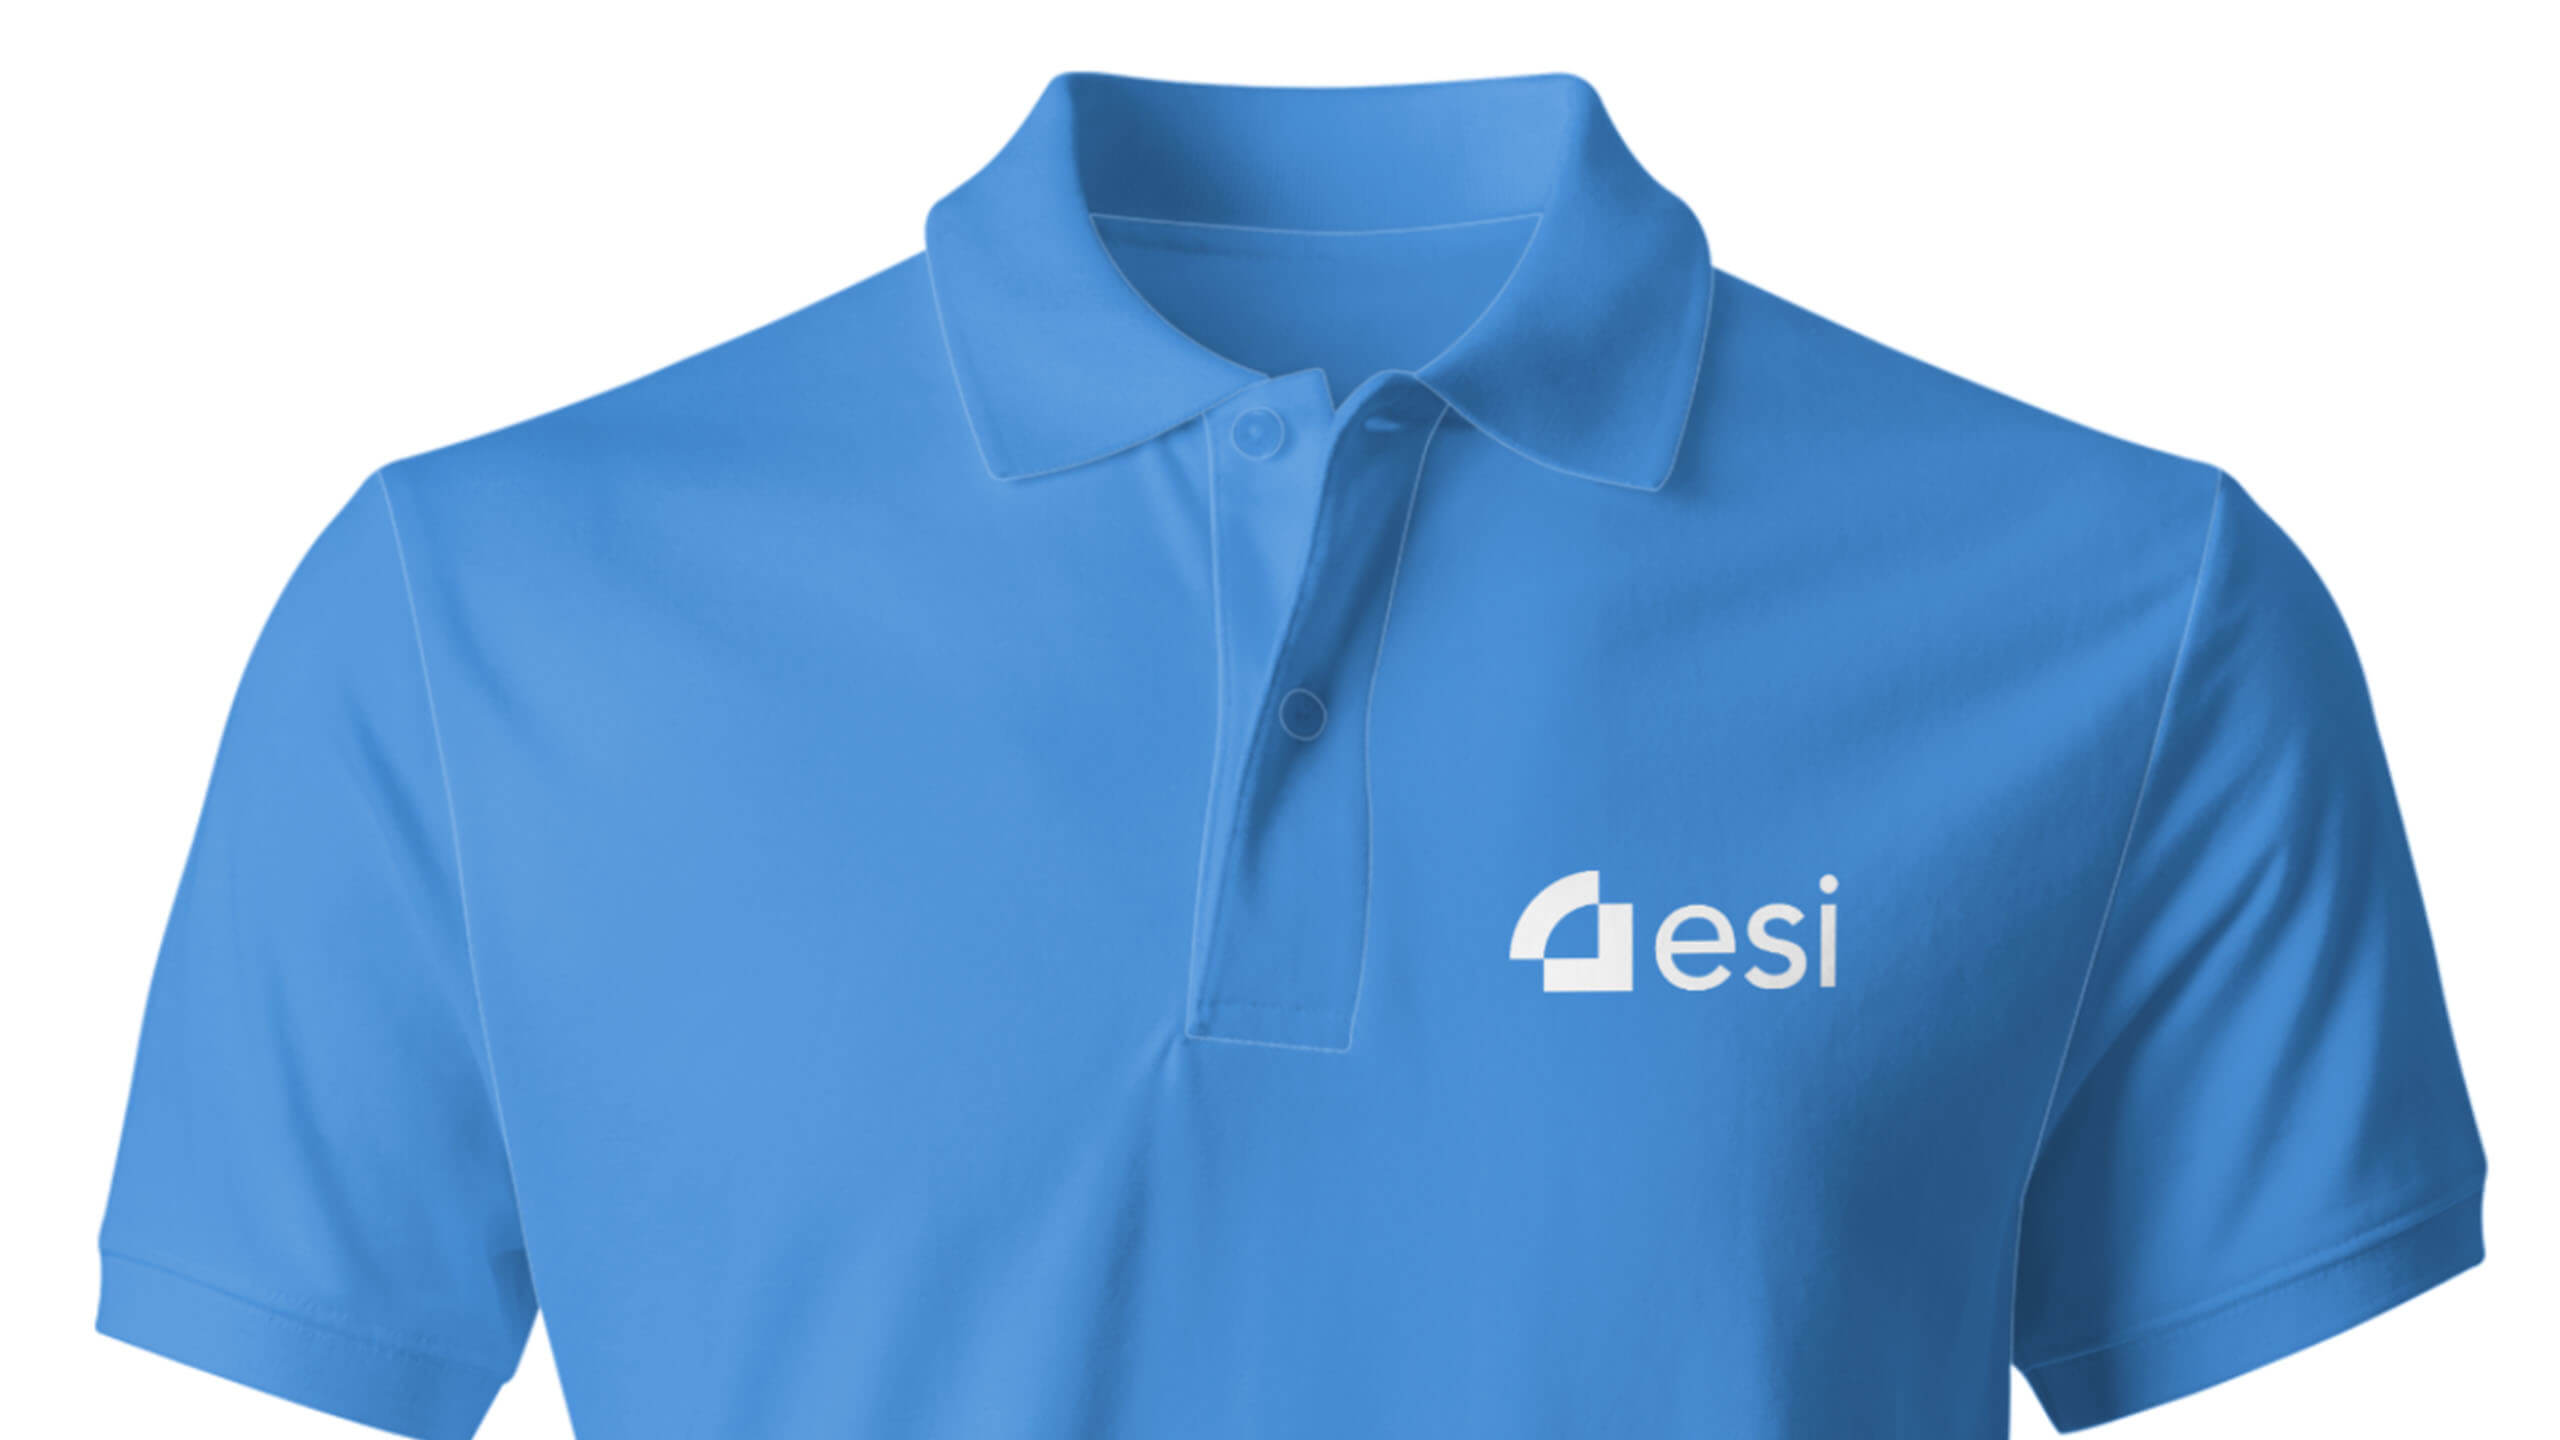 ESI Group shirt design by The Coopers